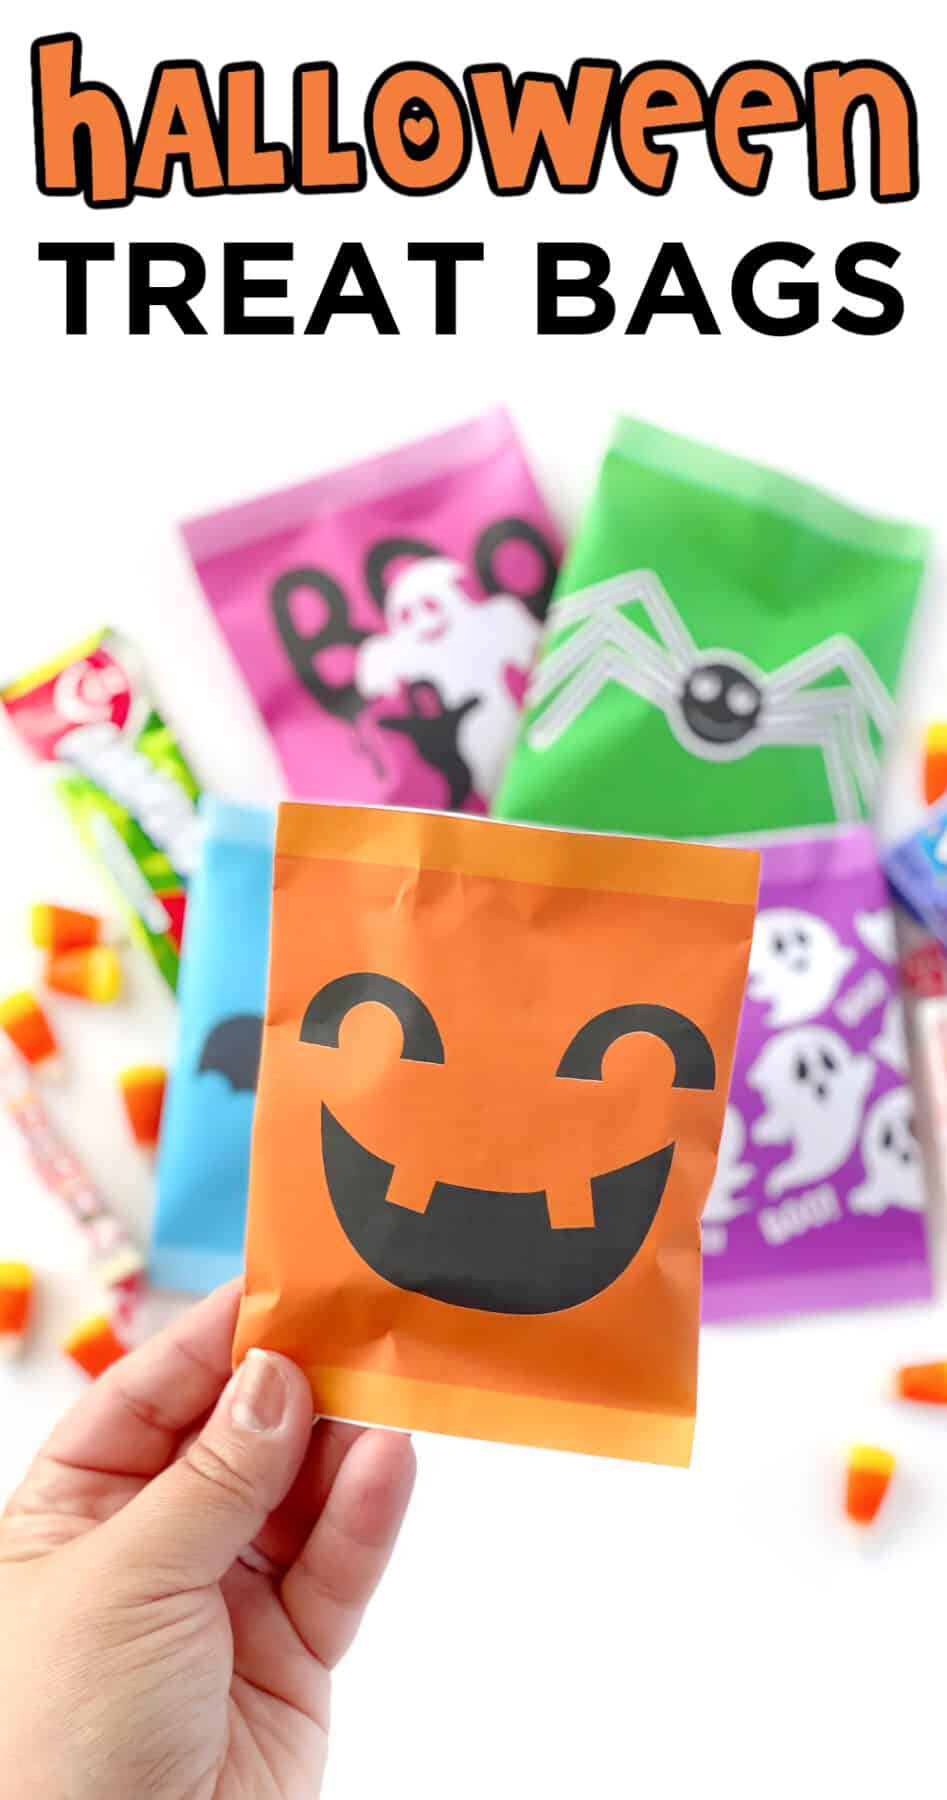 Halloween Treat Bags | Crafts for Kids | PBS KIDS for Parents